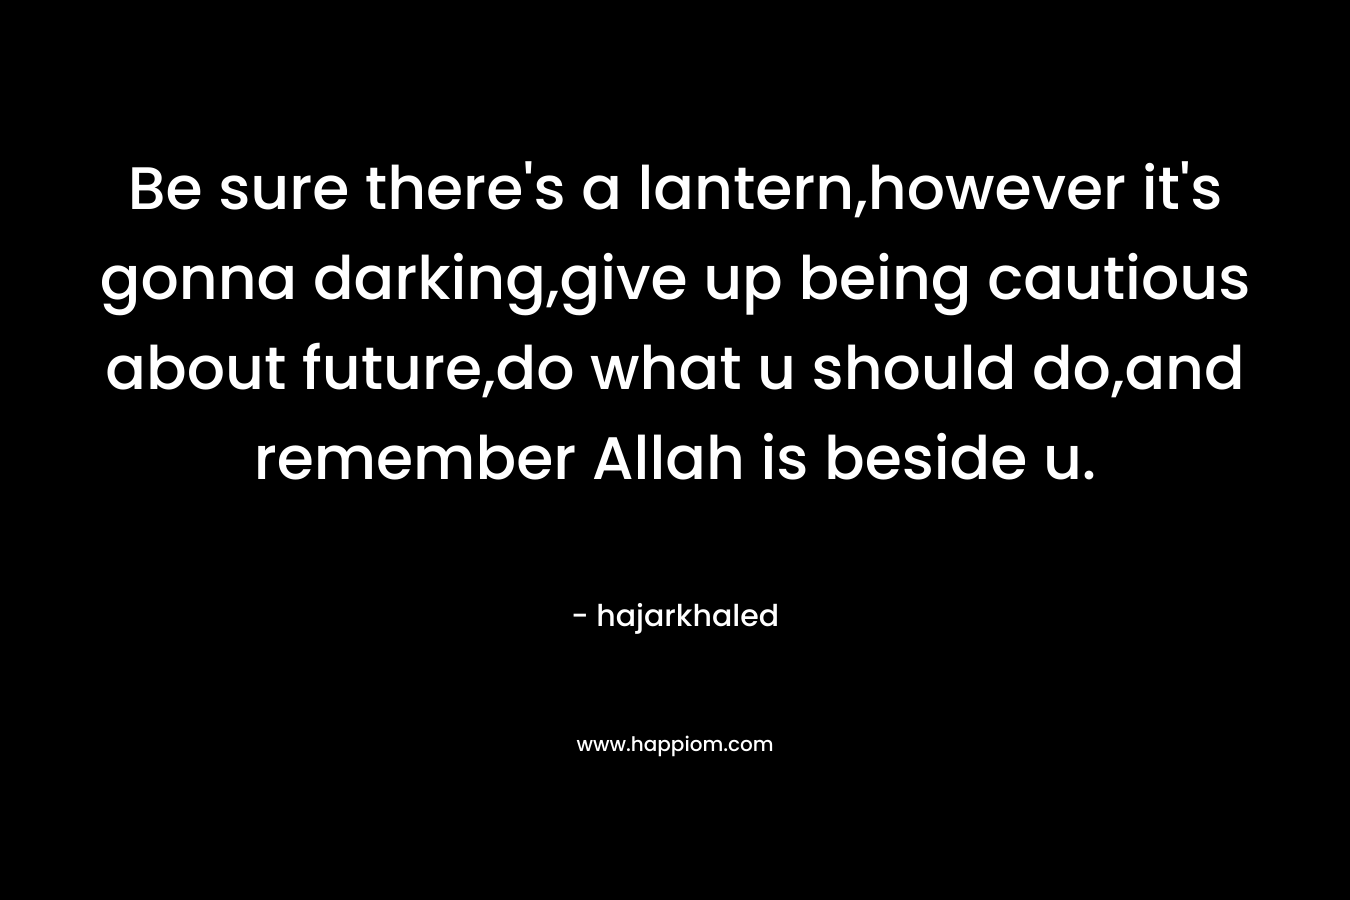 Be sure there's a lantern,however it's gonna darking,give up being cautious about future,do what u should do,and remember Allah is beside u.